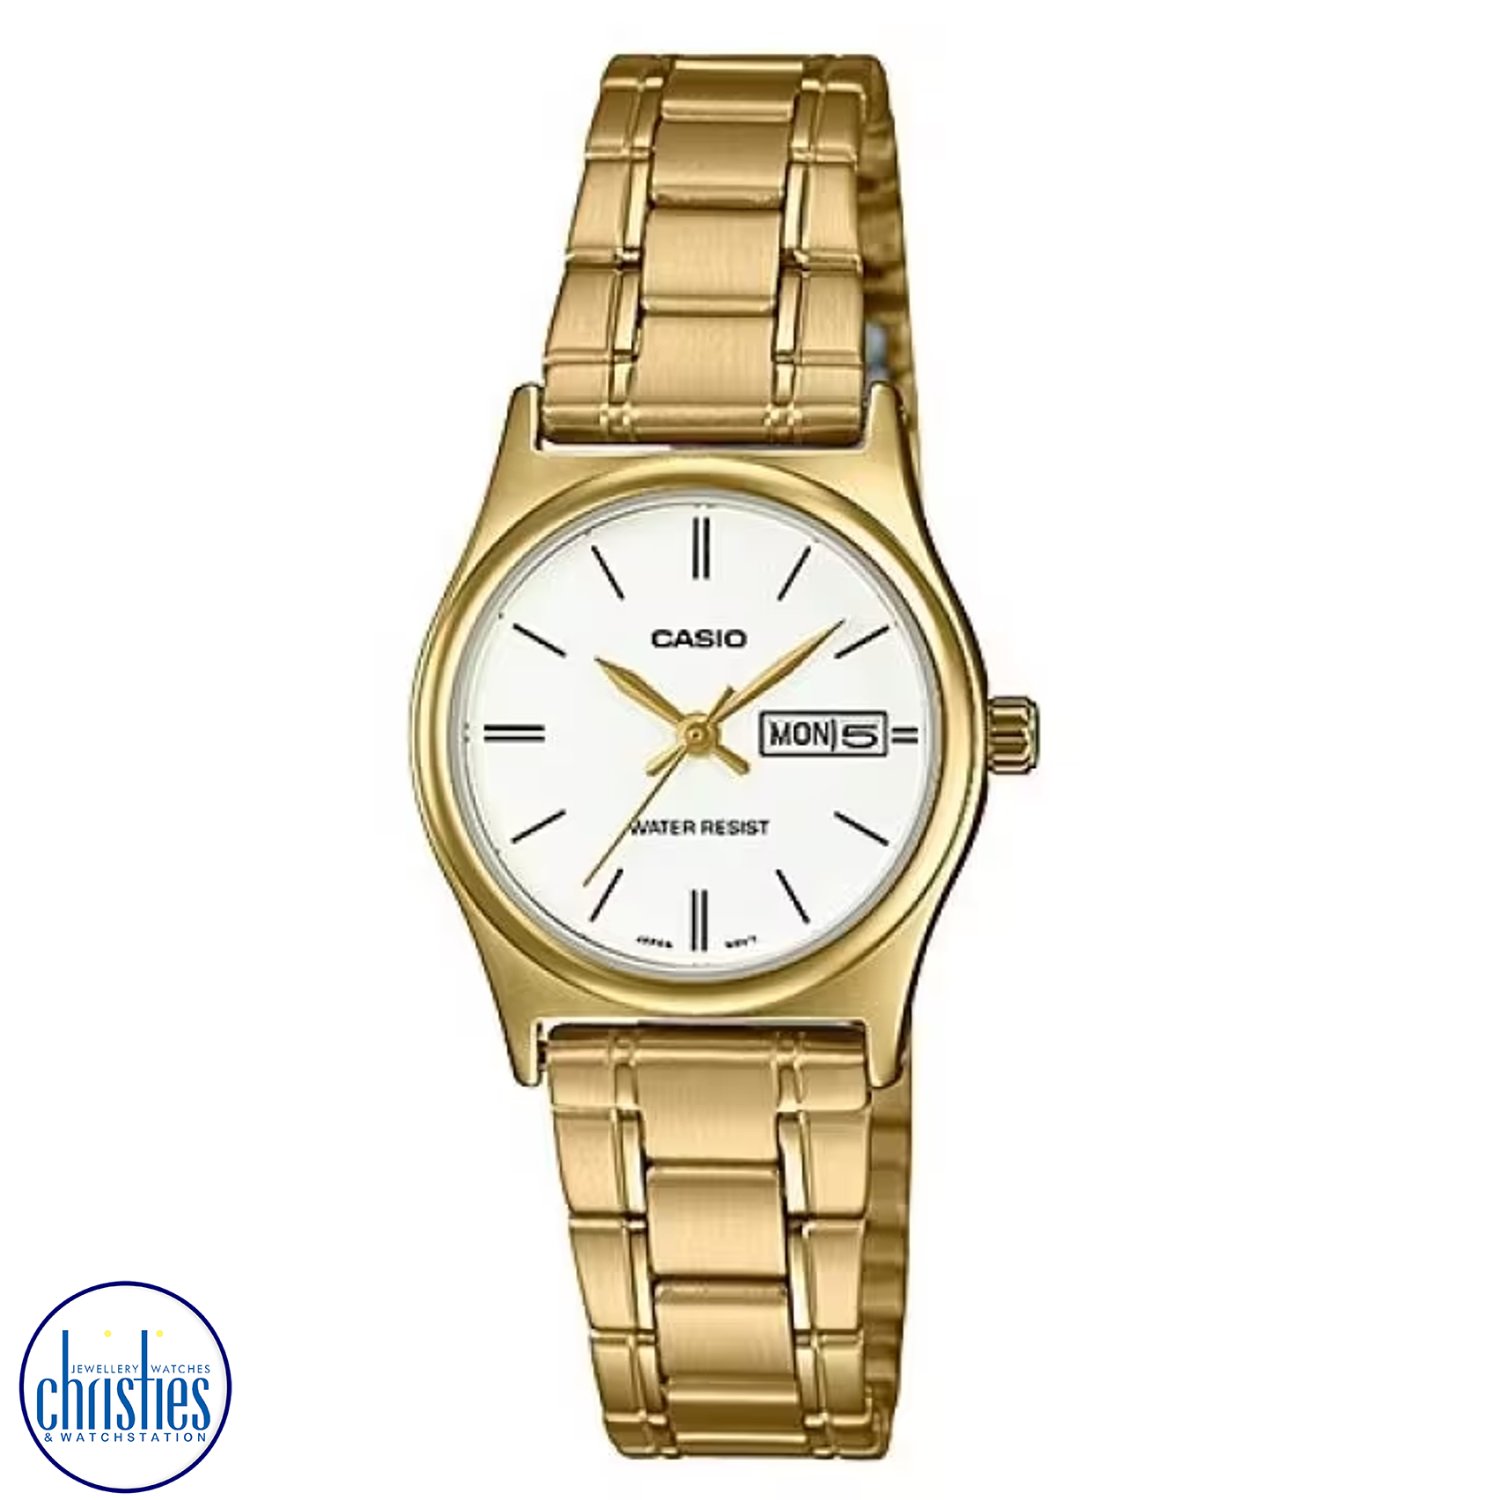 LTPV006G-7B Casio Ladies Stainless Steel Watch. From Casio an analogue stainless steel IP Gold plated watch with clear easy to read dial with Day Dayeand water resistant.